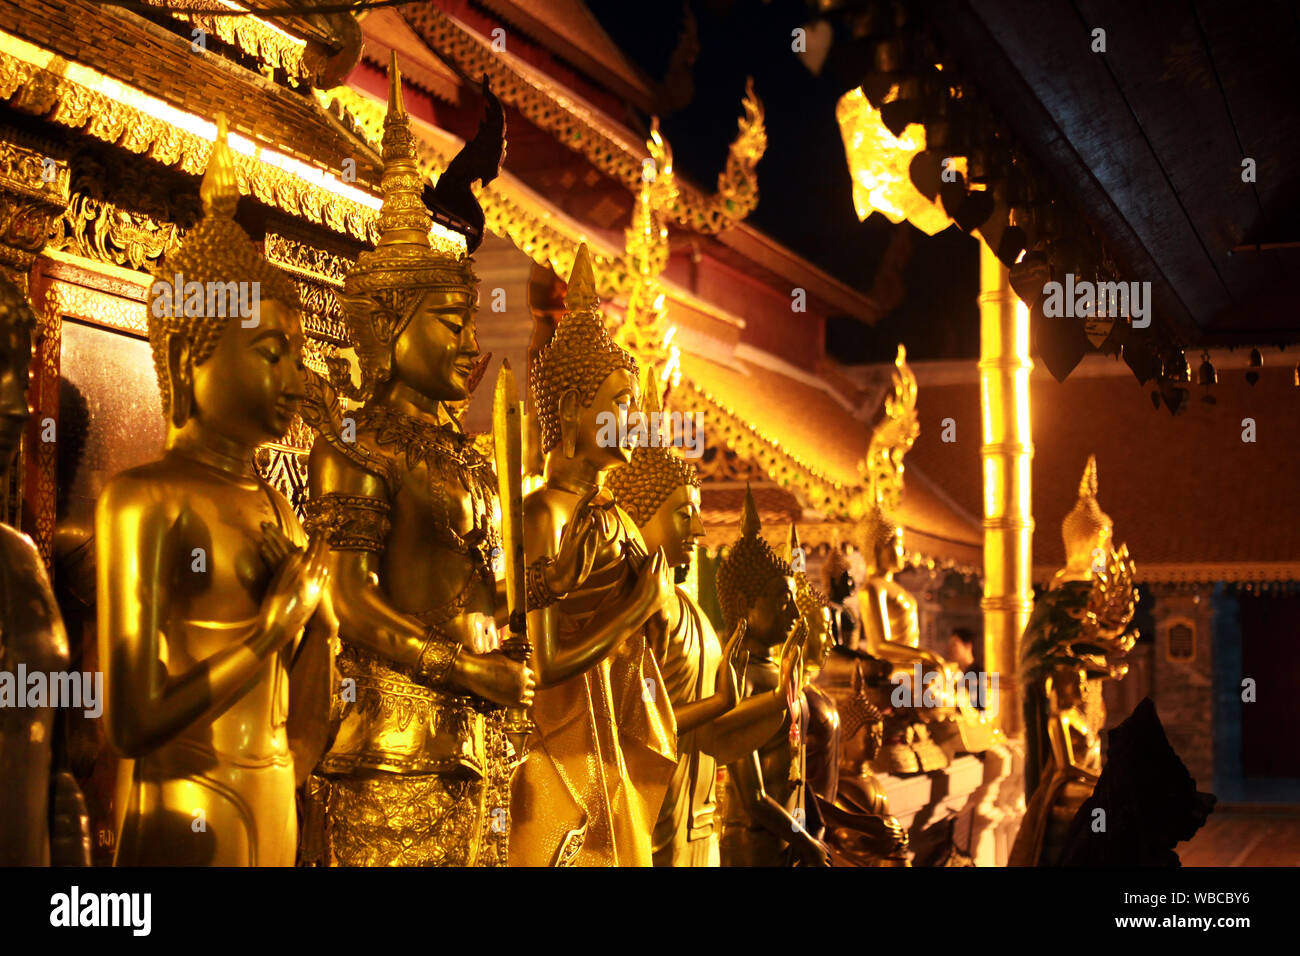 Golden Buddha statues at night in temple in Thailand, Chiang Mai Stock Photo